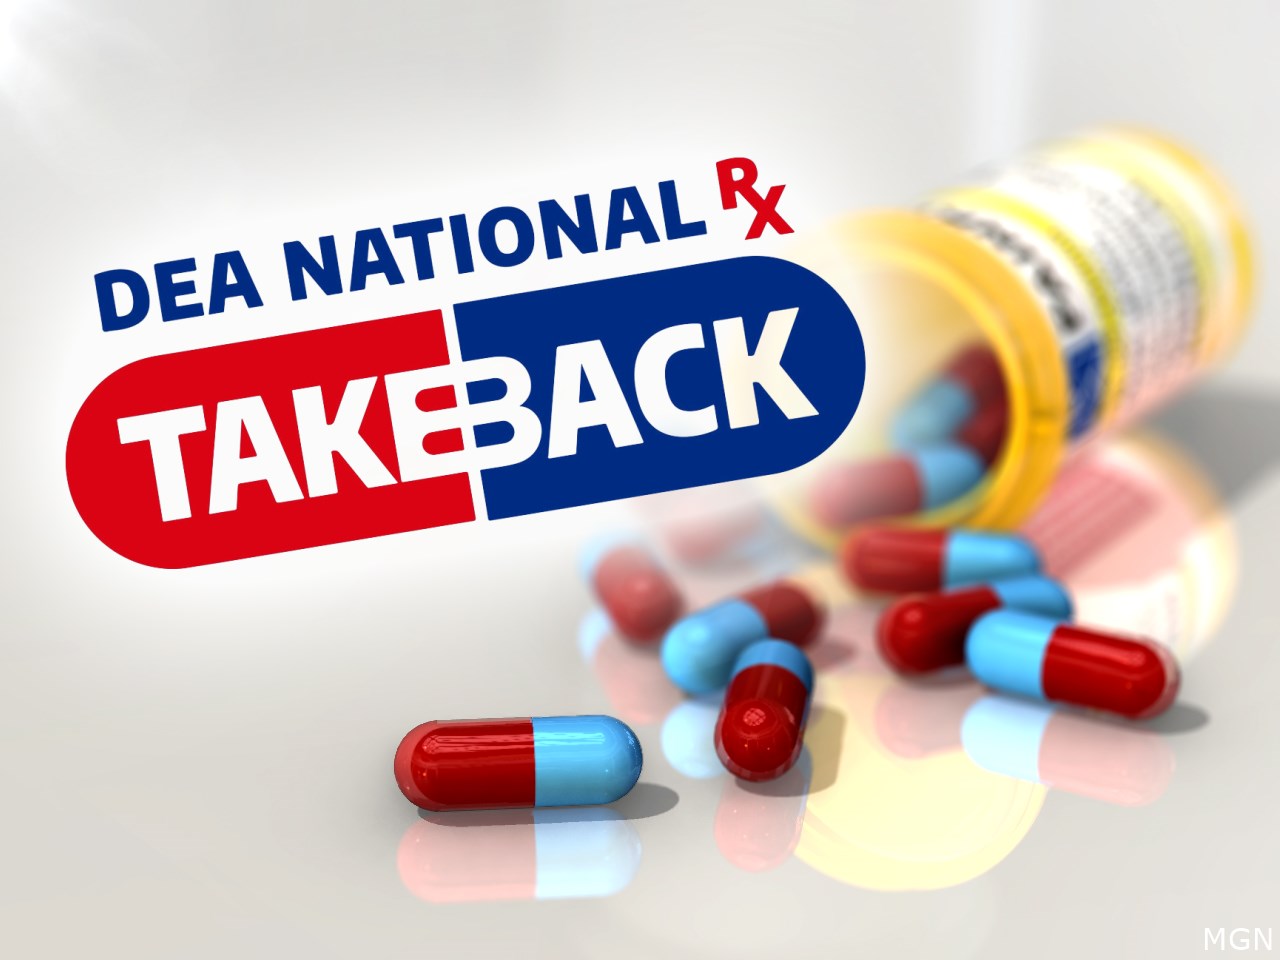 Drug Take Back Day: How to safely dispose of unused medications